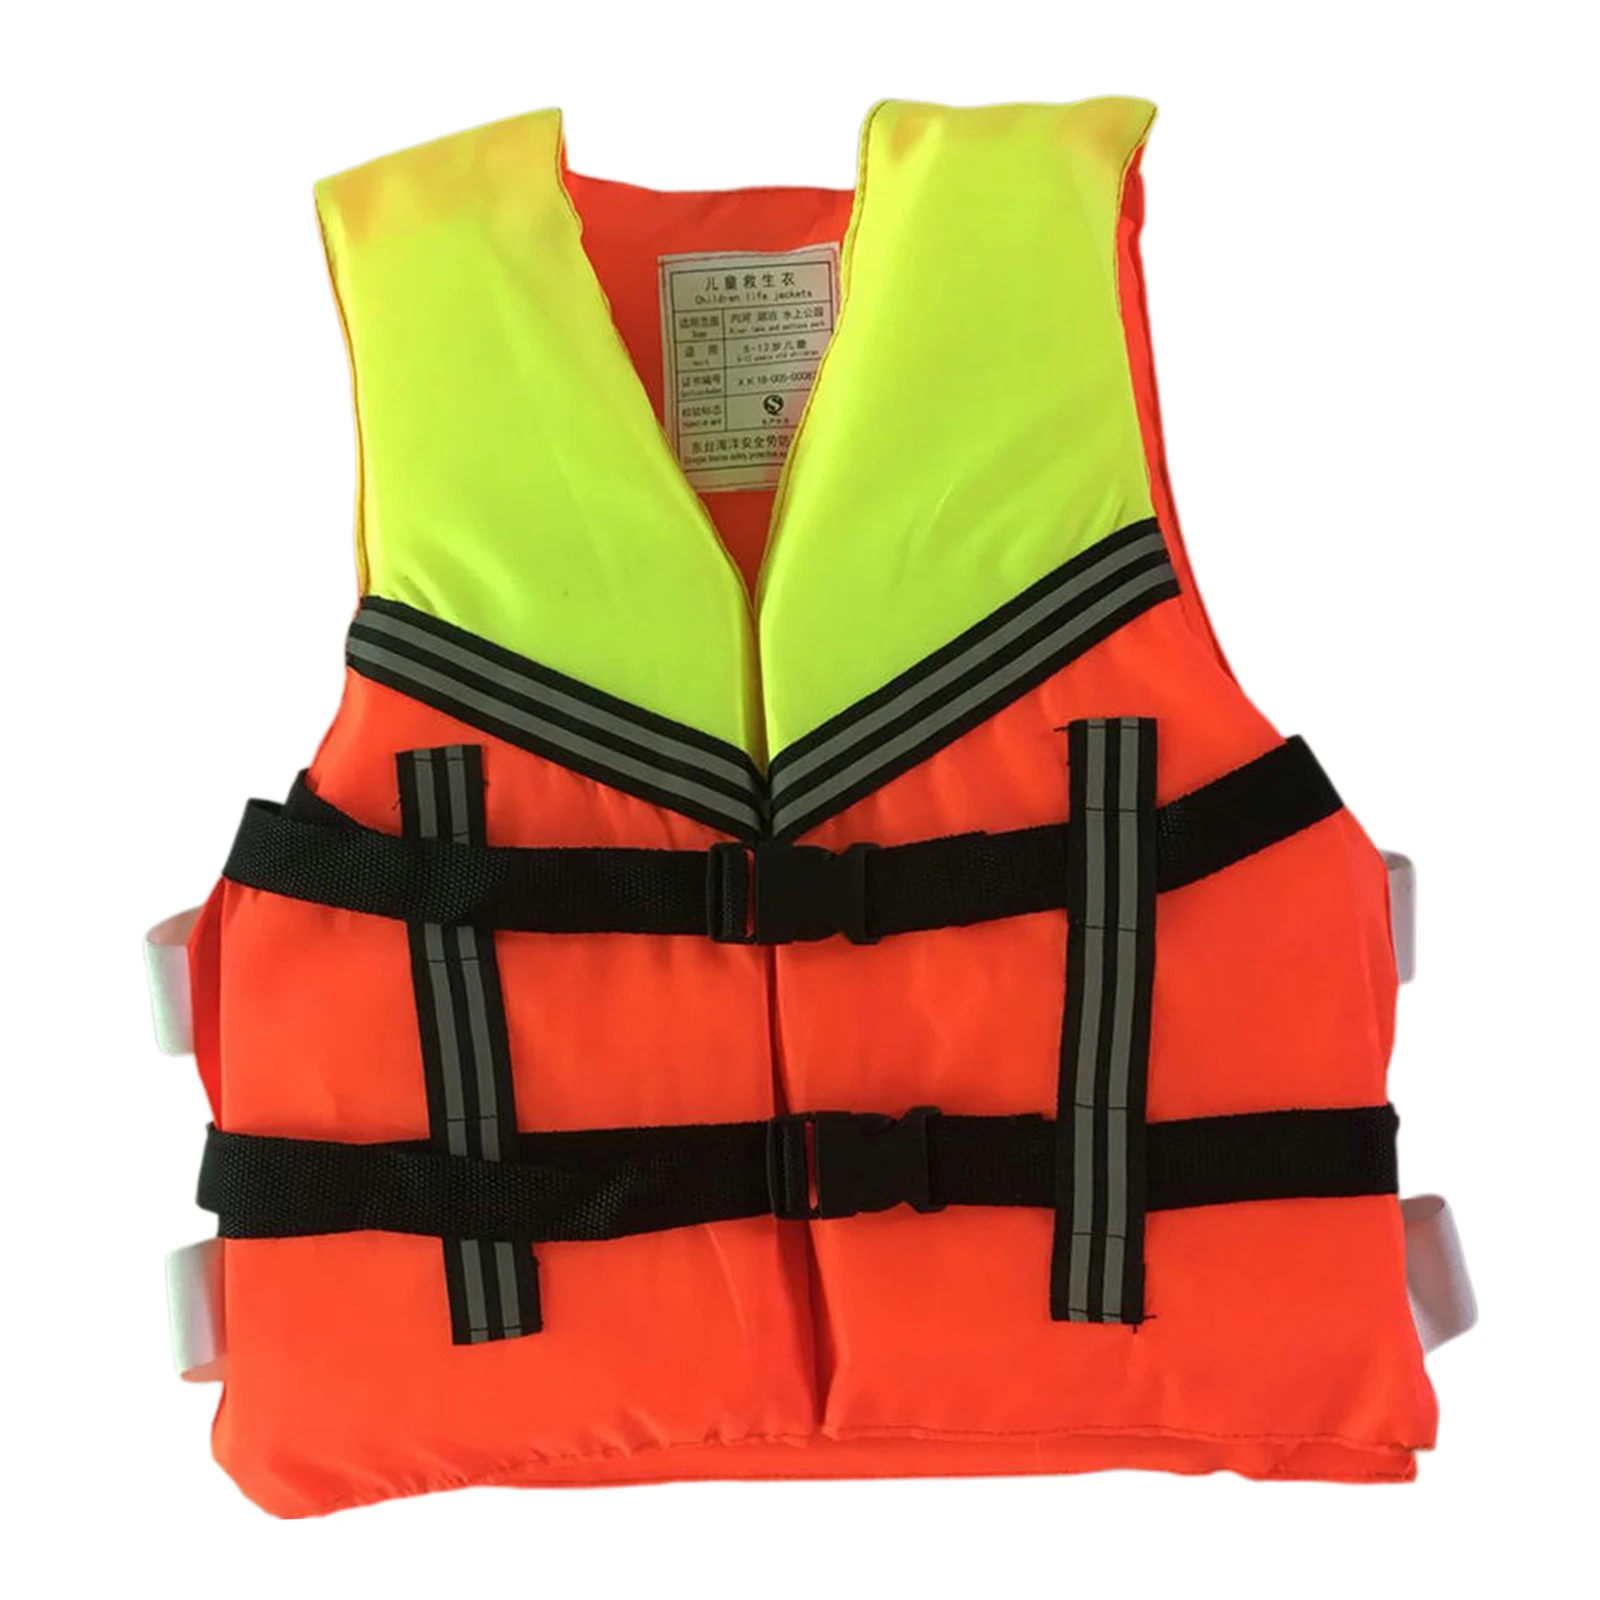 Float Jacket Kids Swim Vest Life Jacket Swimming Aid for Toddlers Children Swimsuit Learn to Swim